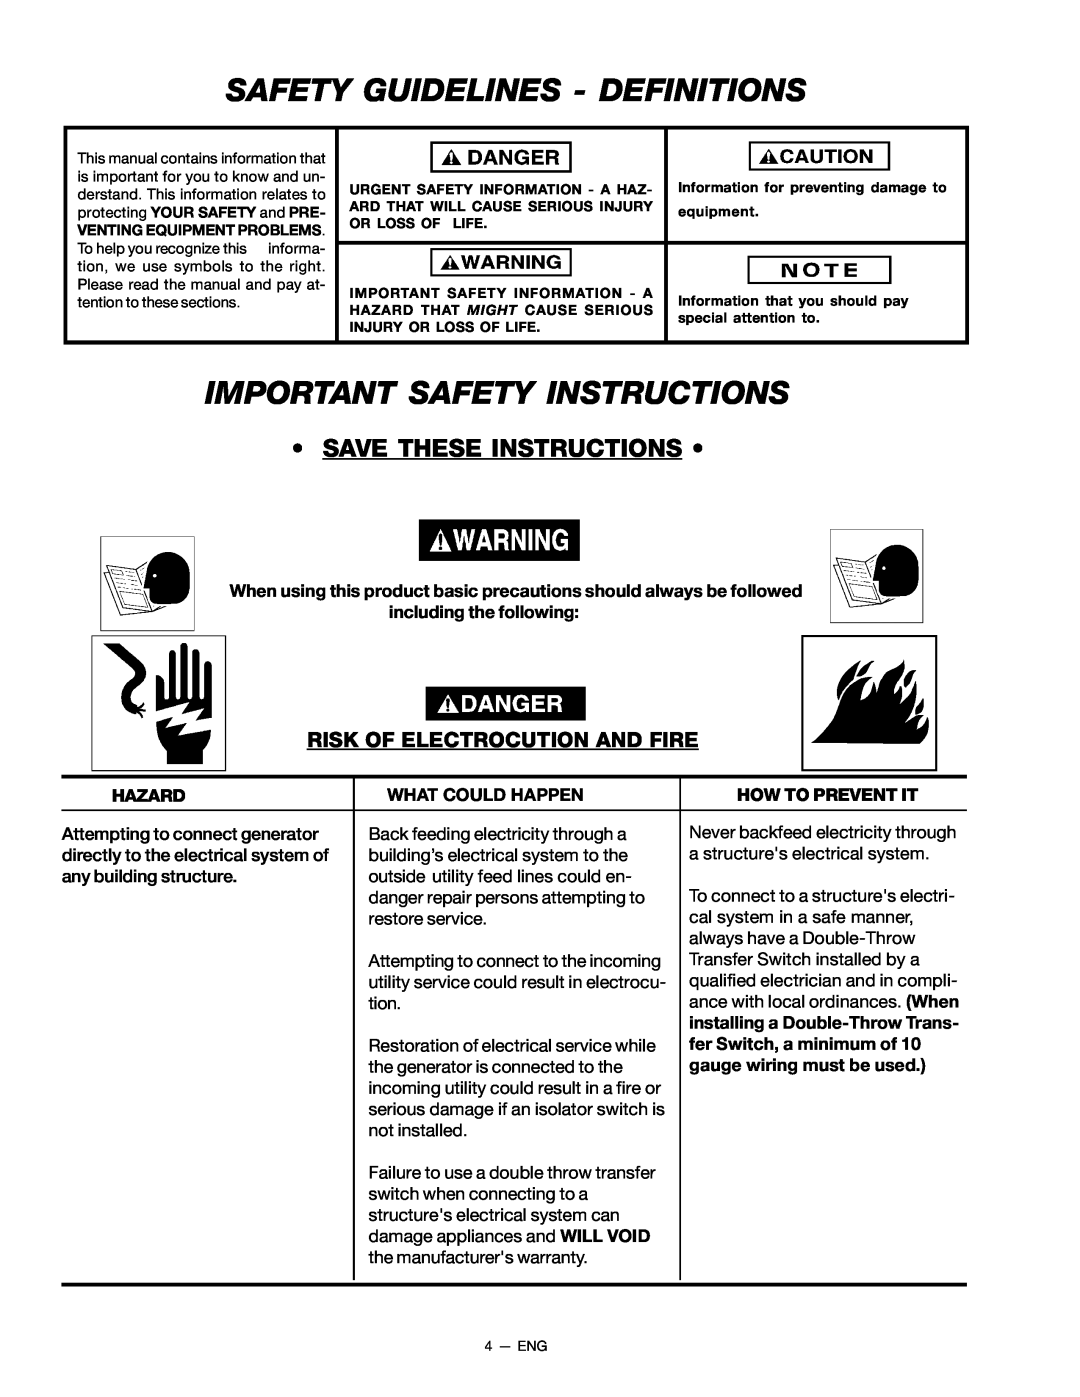 Porter-Cable H450CS, CH350CS, H650CS Safety Guidelines - Definitions, Important Safety Instructions, Hazard 